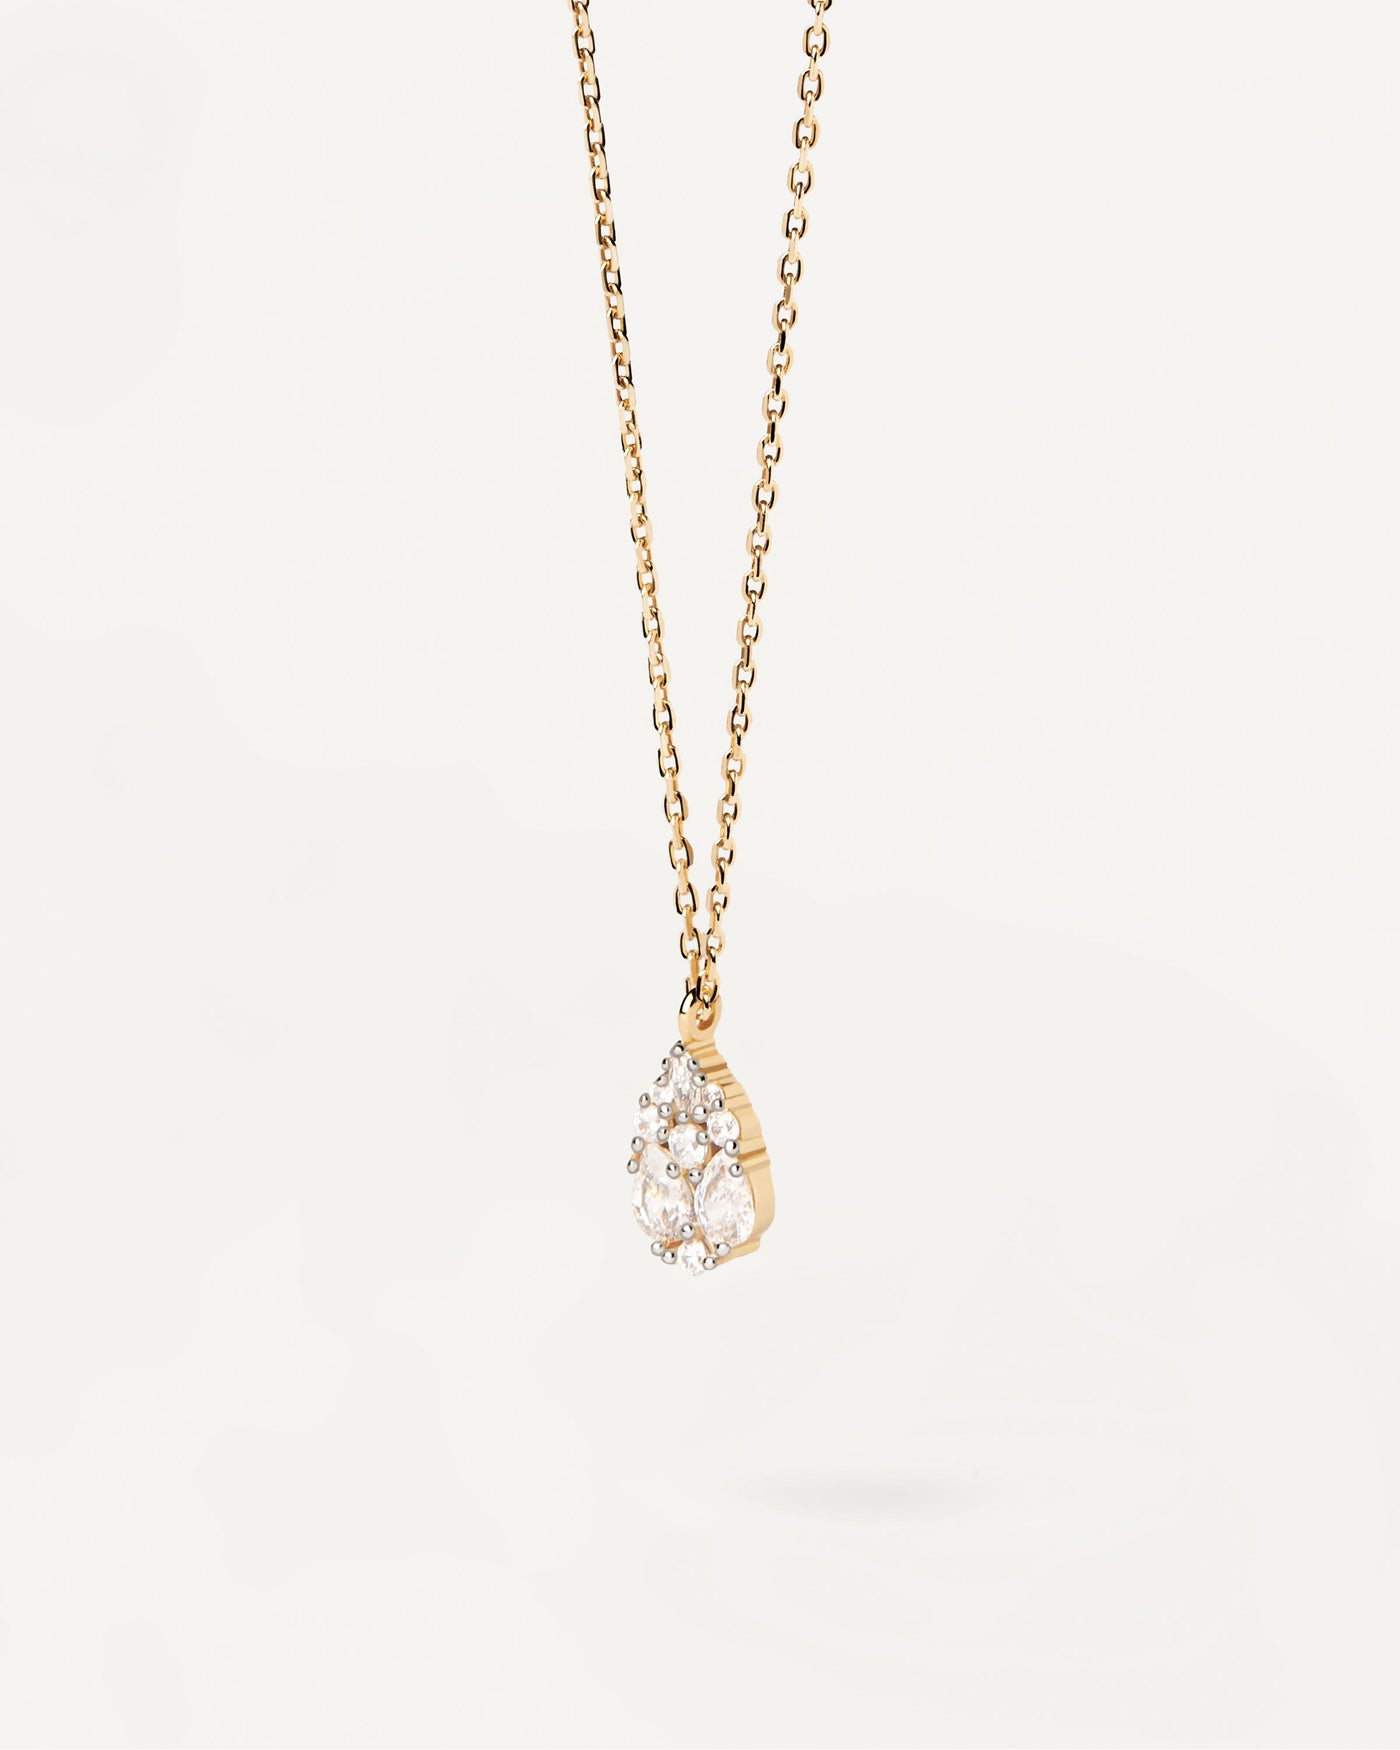 2023 Selection | Vanilla Necklace . Gold-plated chain necklace with pear shape multi-stone cluster pendant . Get the latest arrival from PDPAOLA. Place your order safely and get this Best Seller. Free Shipping.